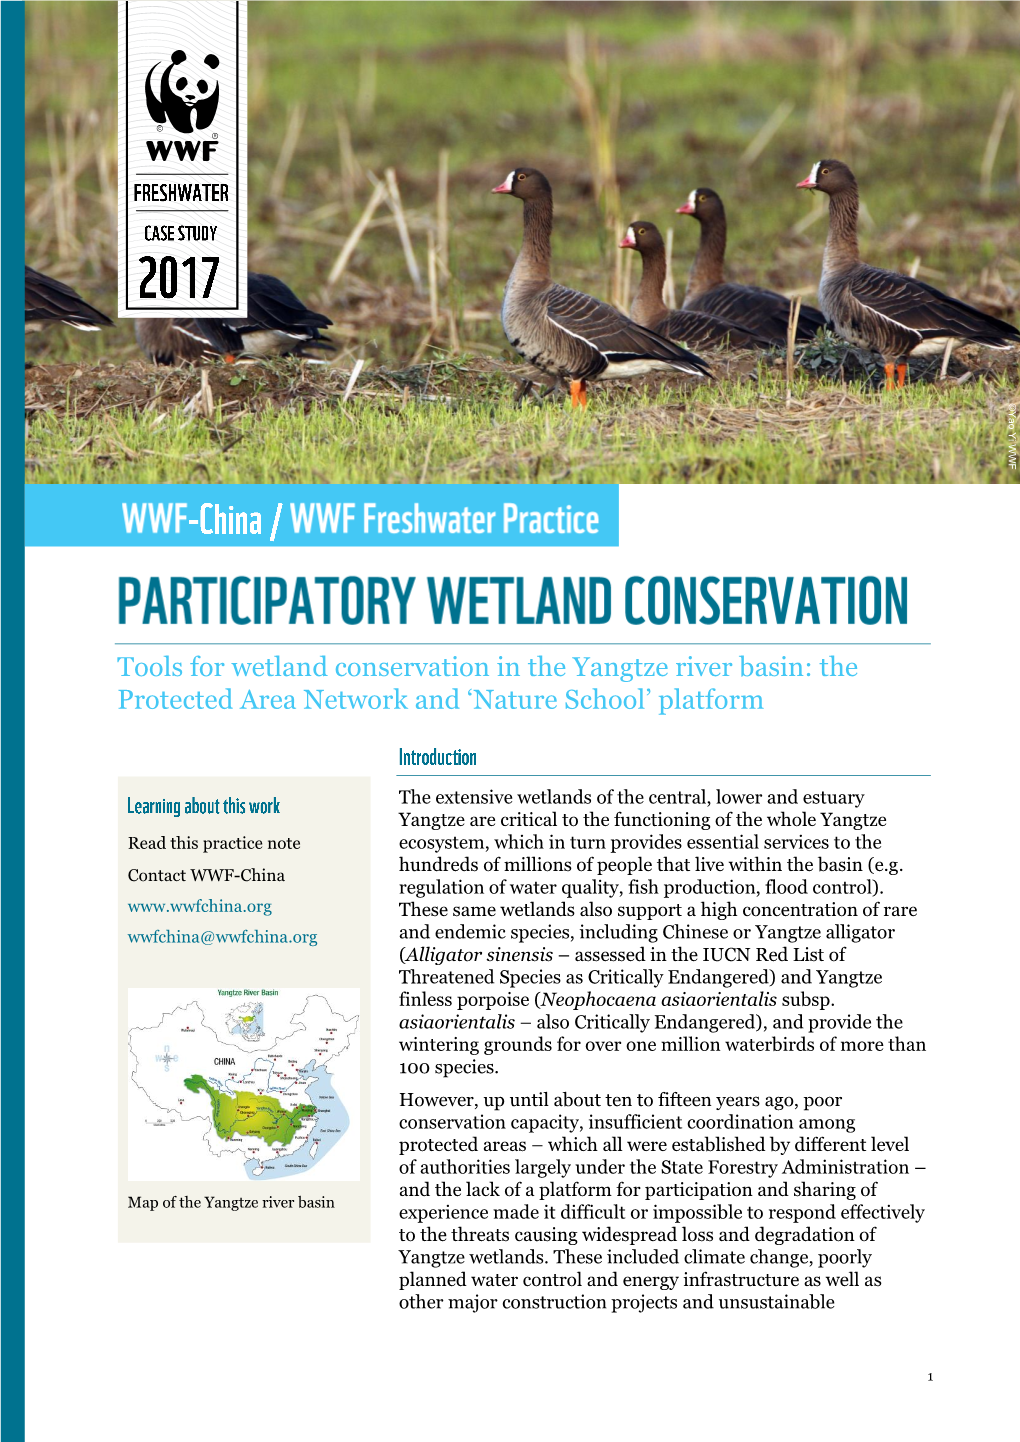 Tools for Wetland Conservation in the Yangtze River Basin: the Protected Area Network and ‘Nature School’ Platform